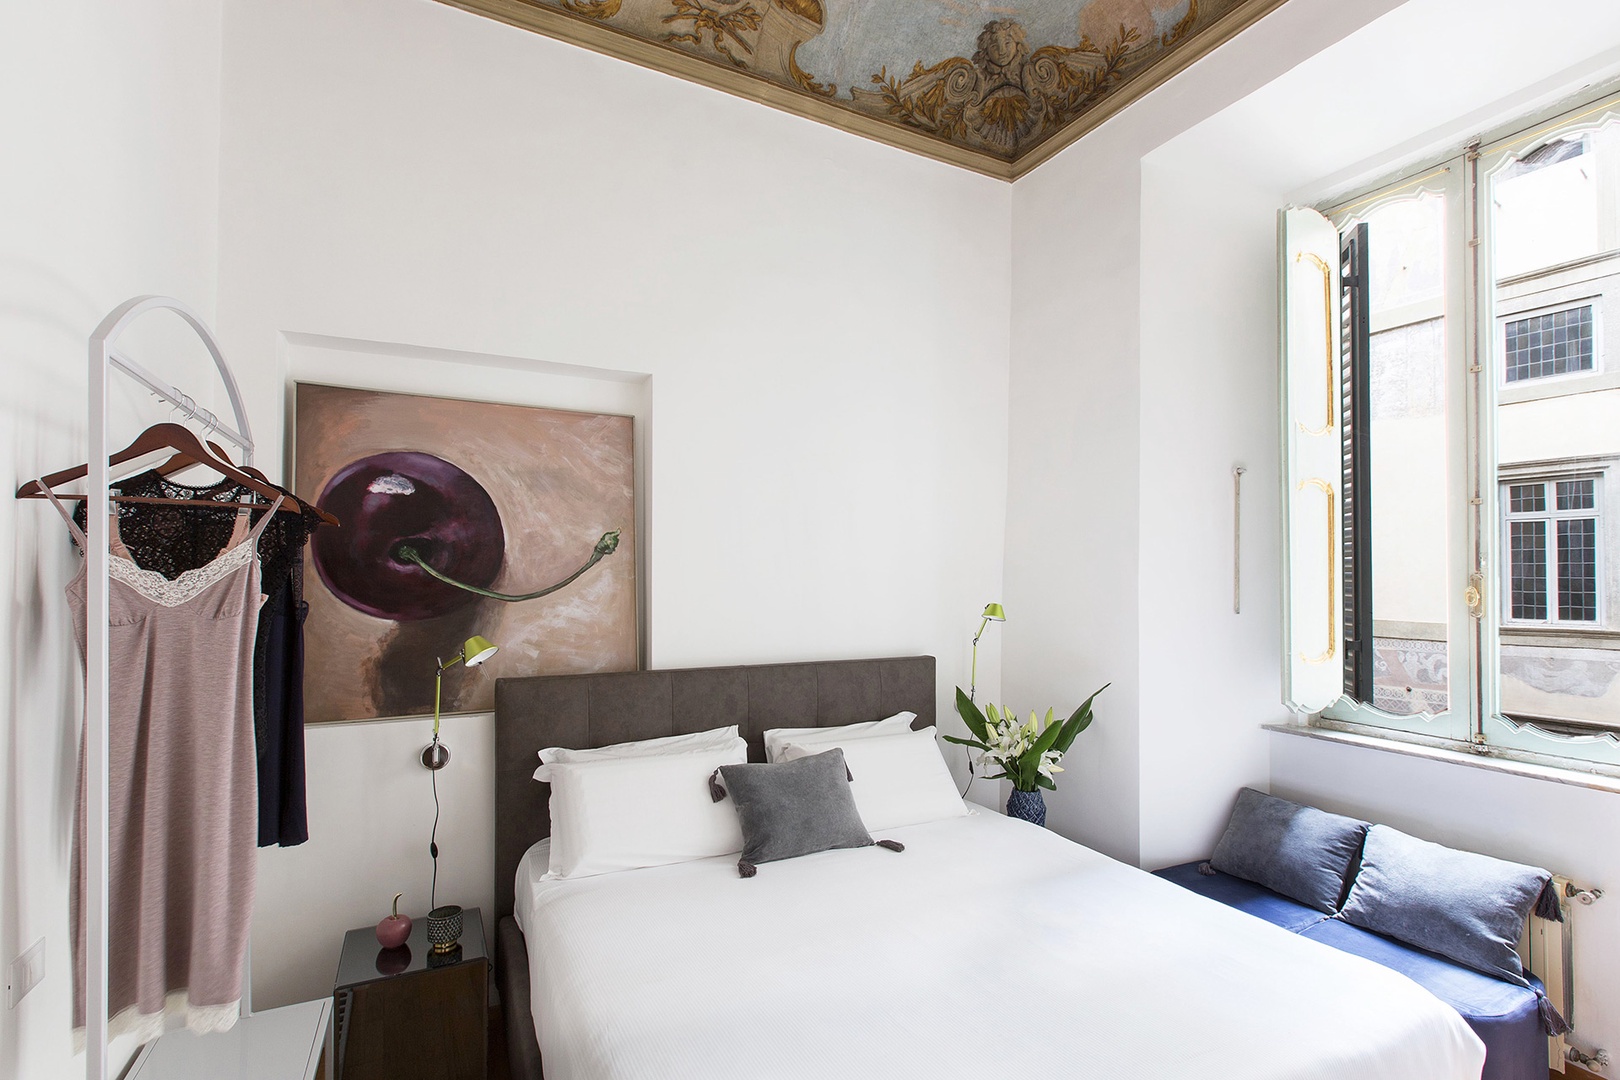 Bedroom 3 has charming frescoes of angles on the ceiling by famous baroque artist Nicolas Poussin.